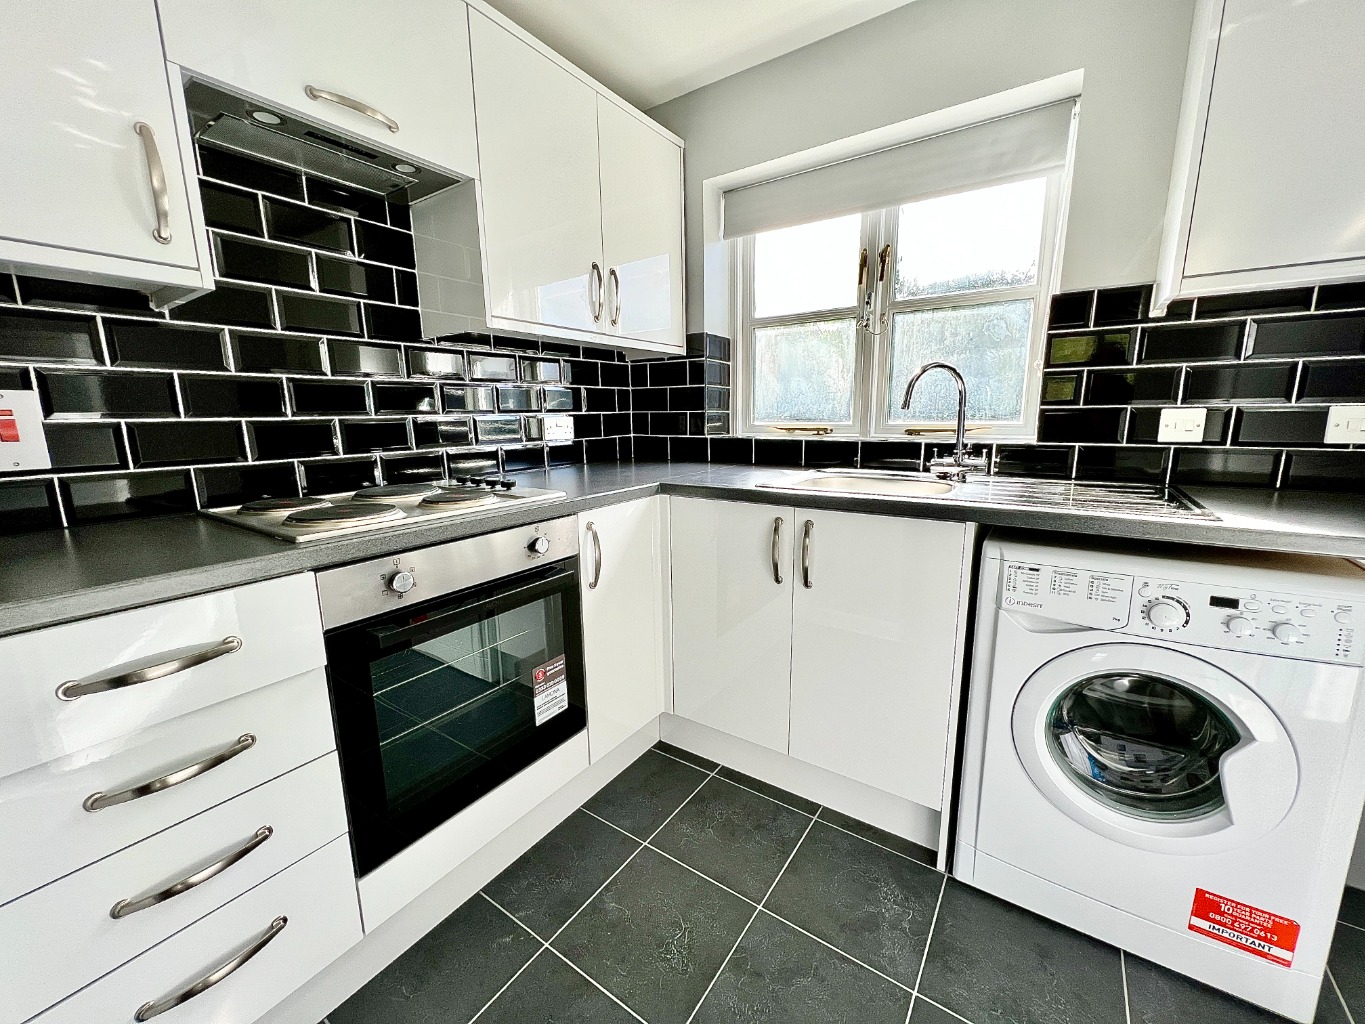 Beaumont Gibbs are offering this beautifully refurbished one bedroomed first floor maisonette to let. Situated in a cul-de-sac location in Plumstead, not far off Plumstead High Street, the property is offered on an unfurnished basis and is available for immediate occupancy.